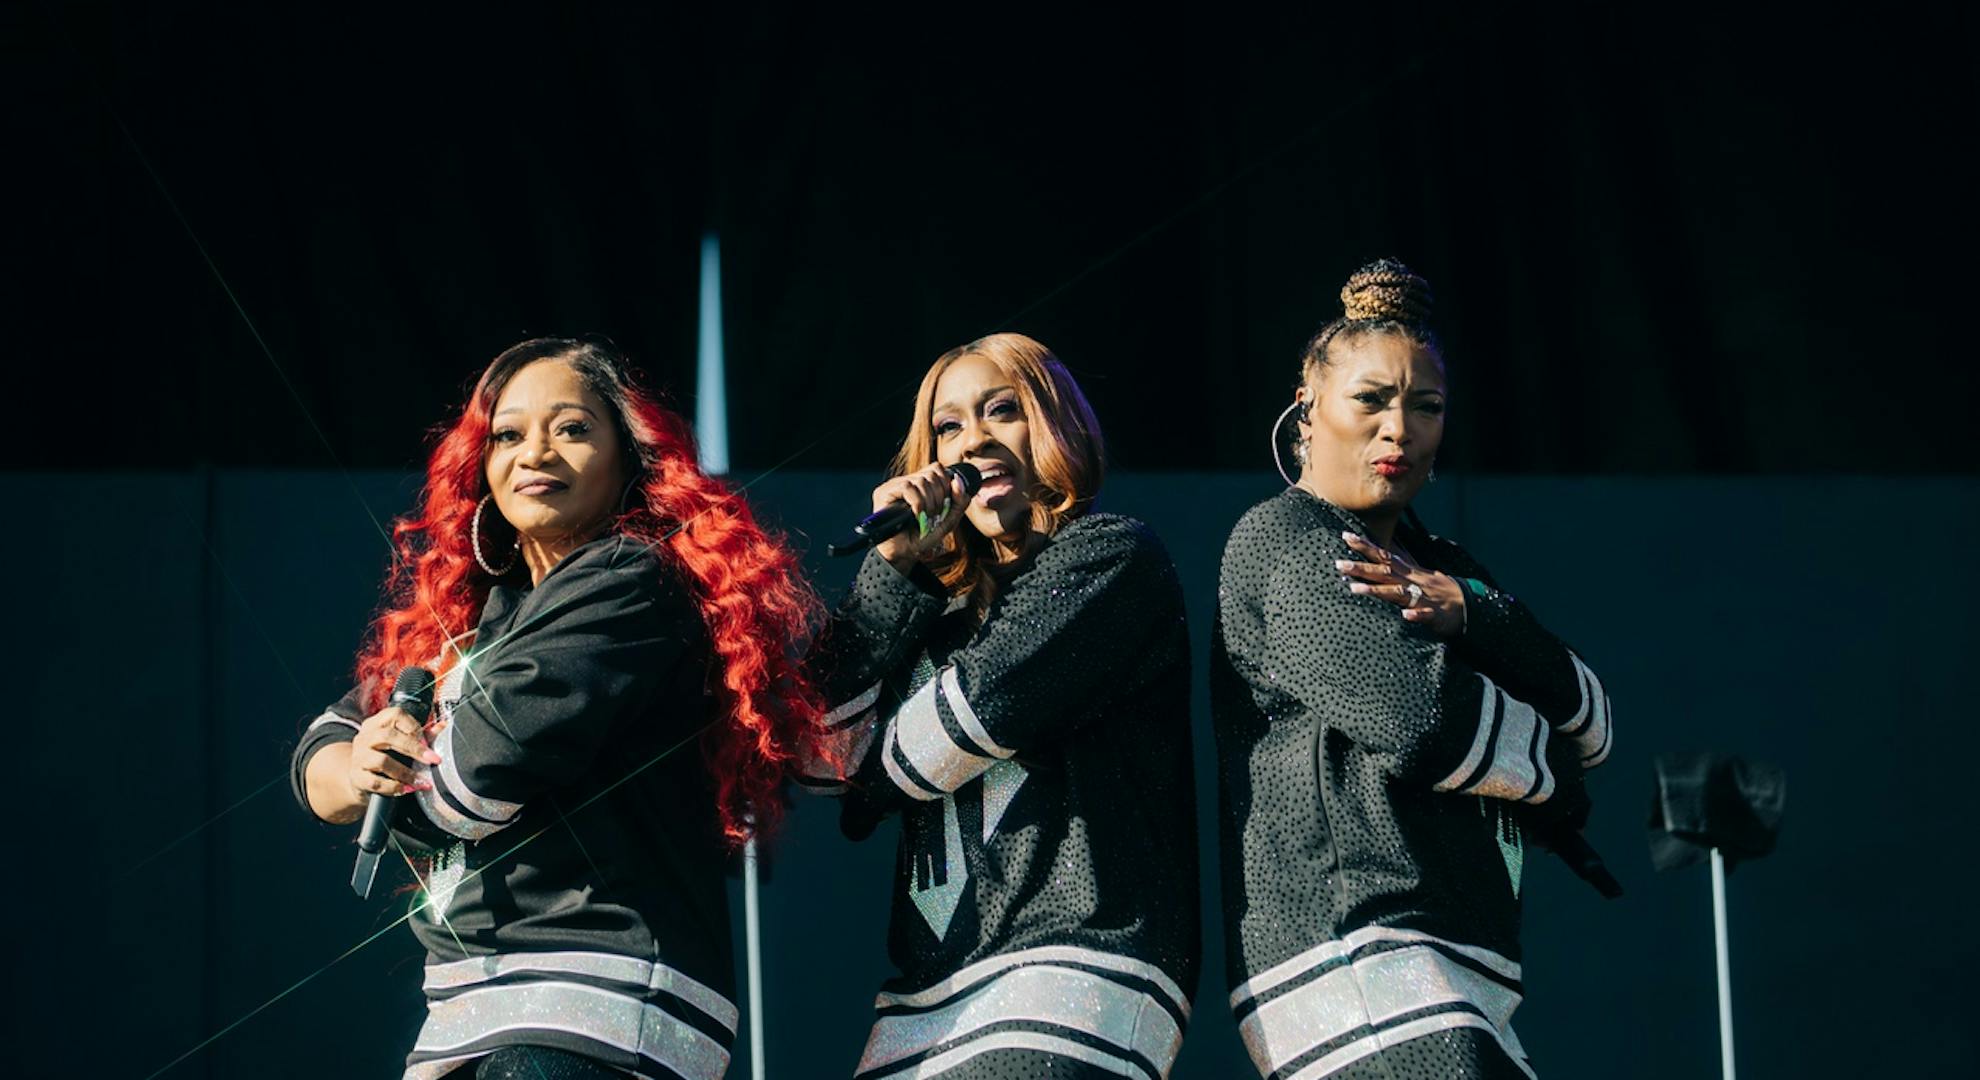 SWV performs during the 2022 Lovers & Friends music festival at the Las Vegas Festival Grounds on May 15, 2022 in Las Vegas, Nevada.